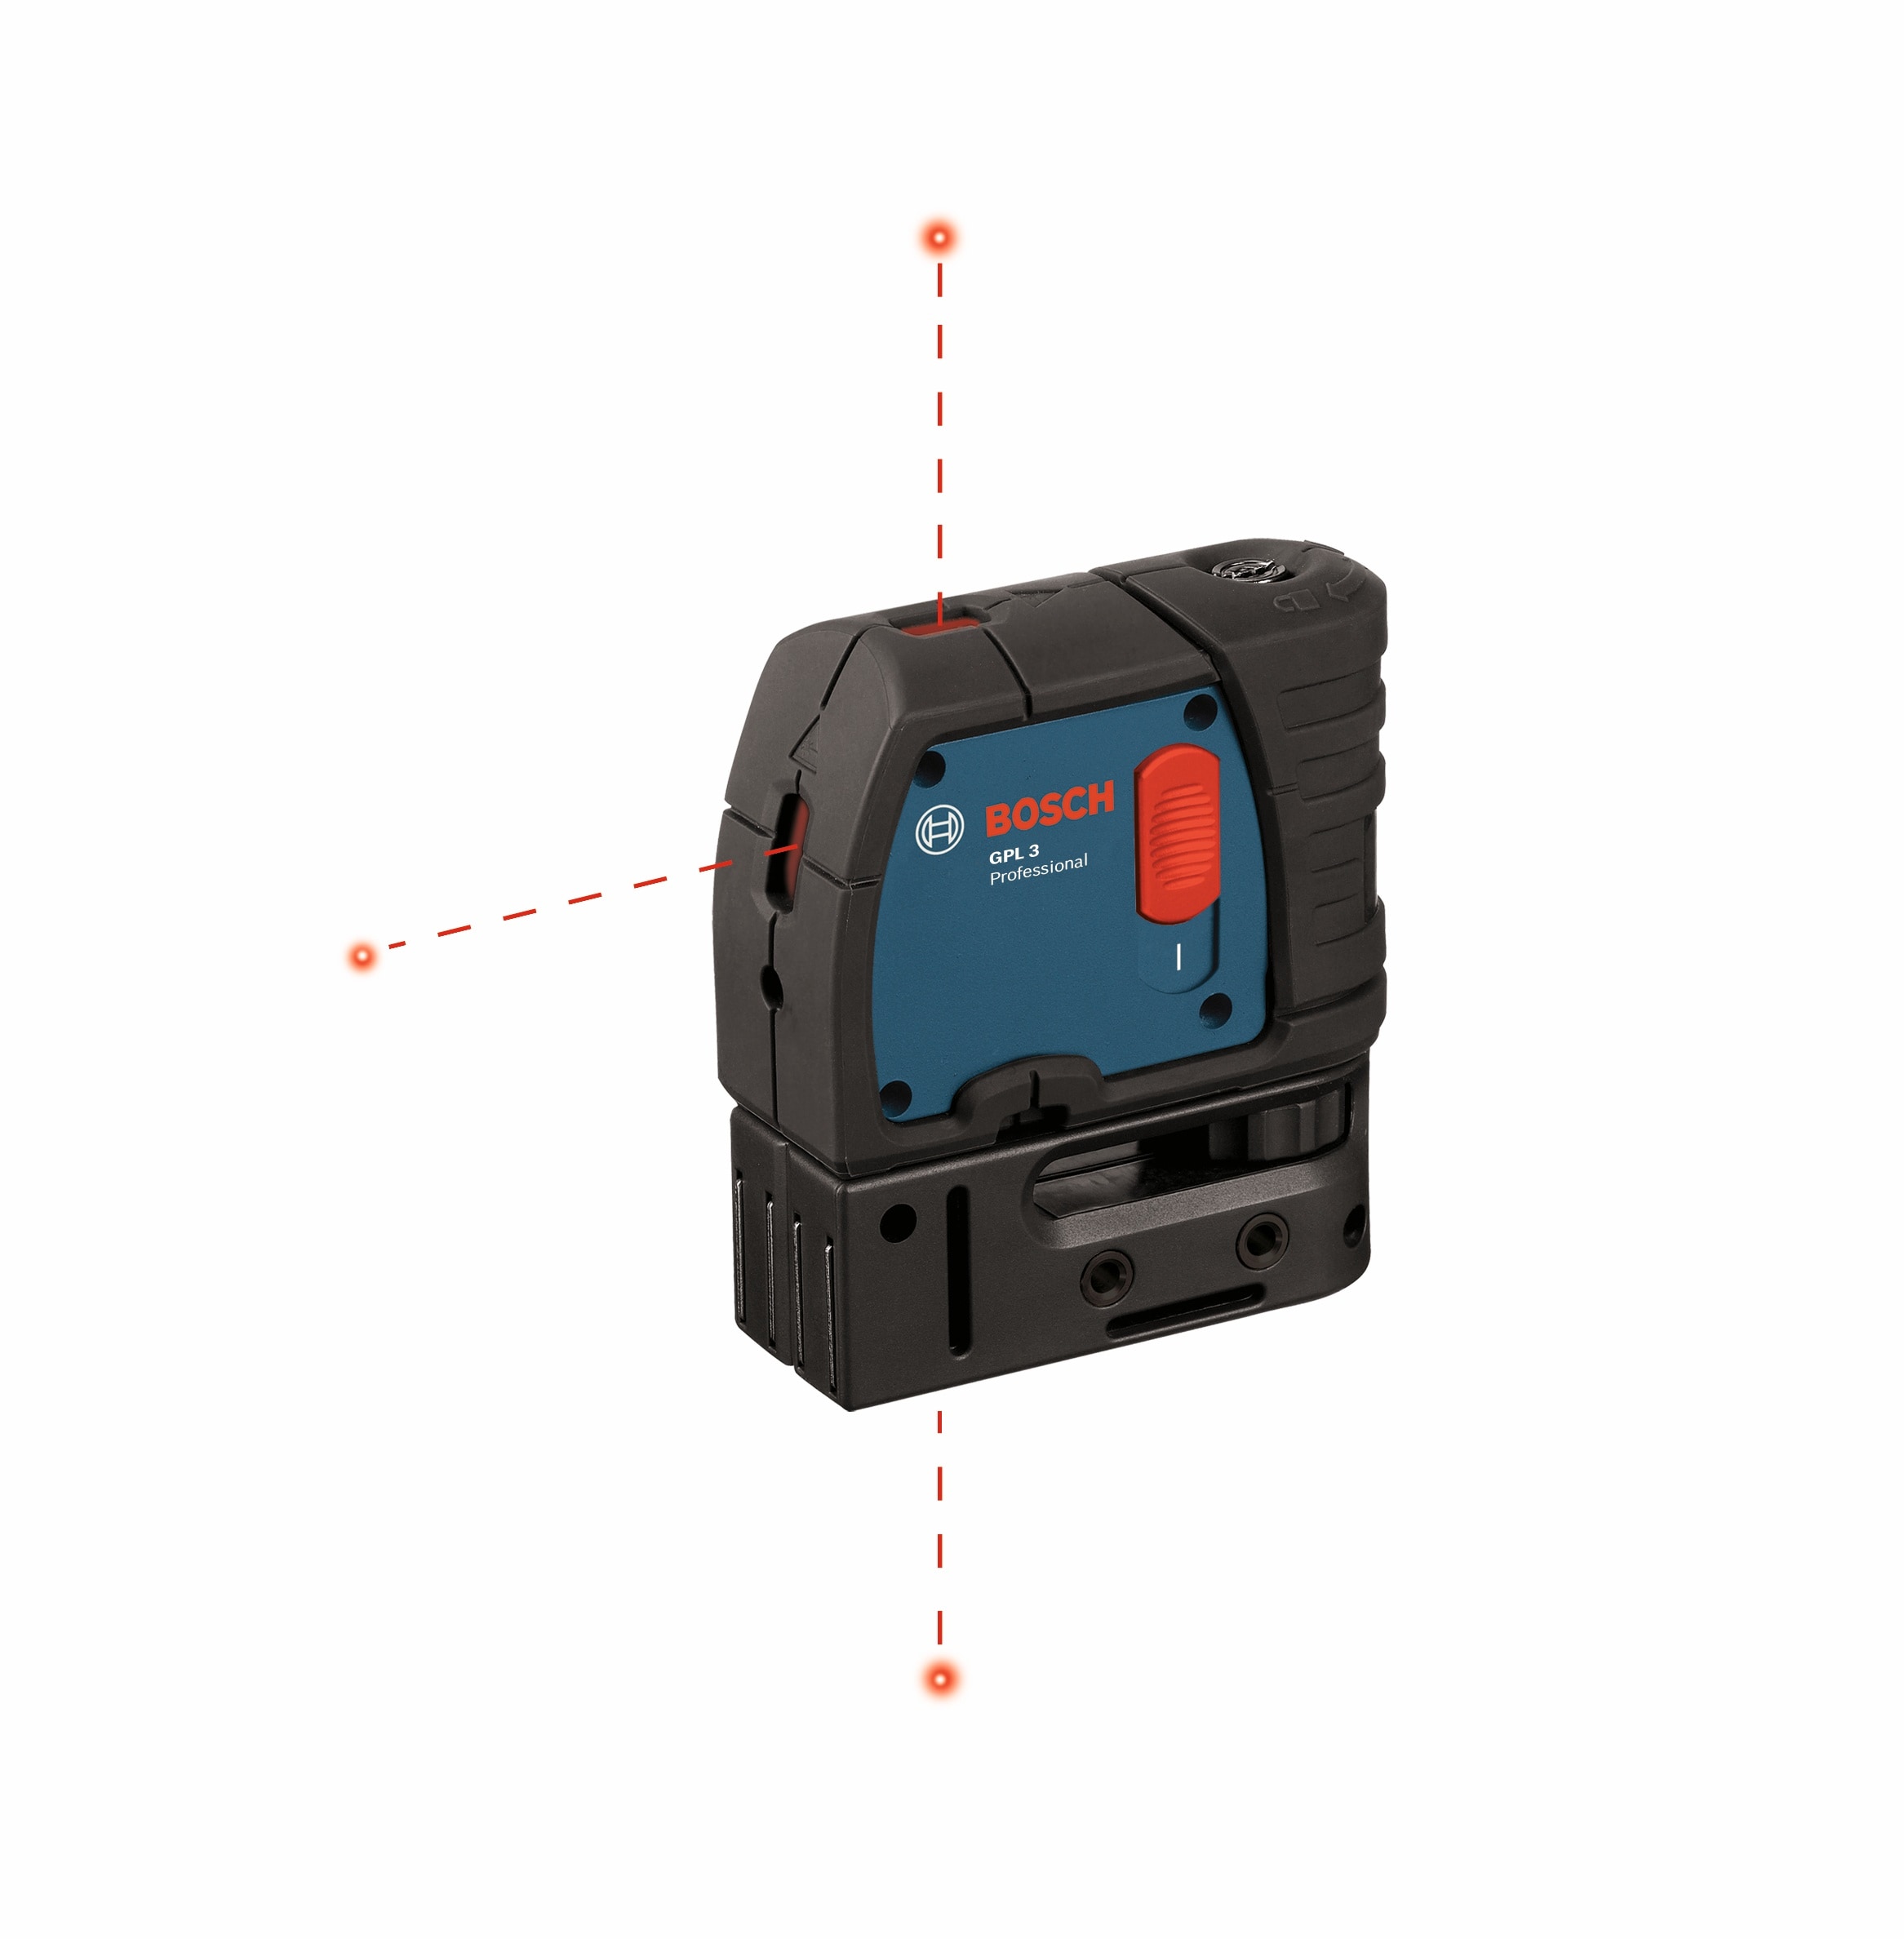 Bosch 100' Self-Leveling Indoor Laser Level $59 + Free Shipping